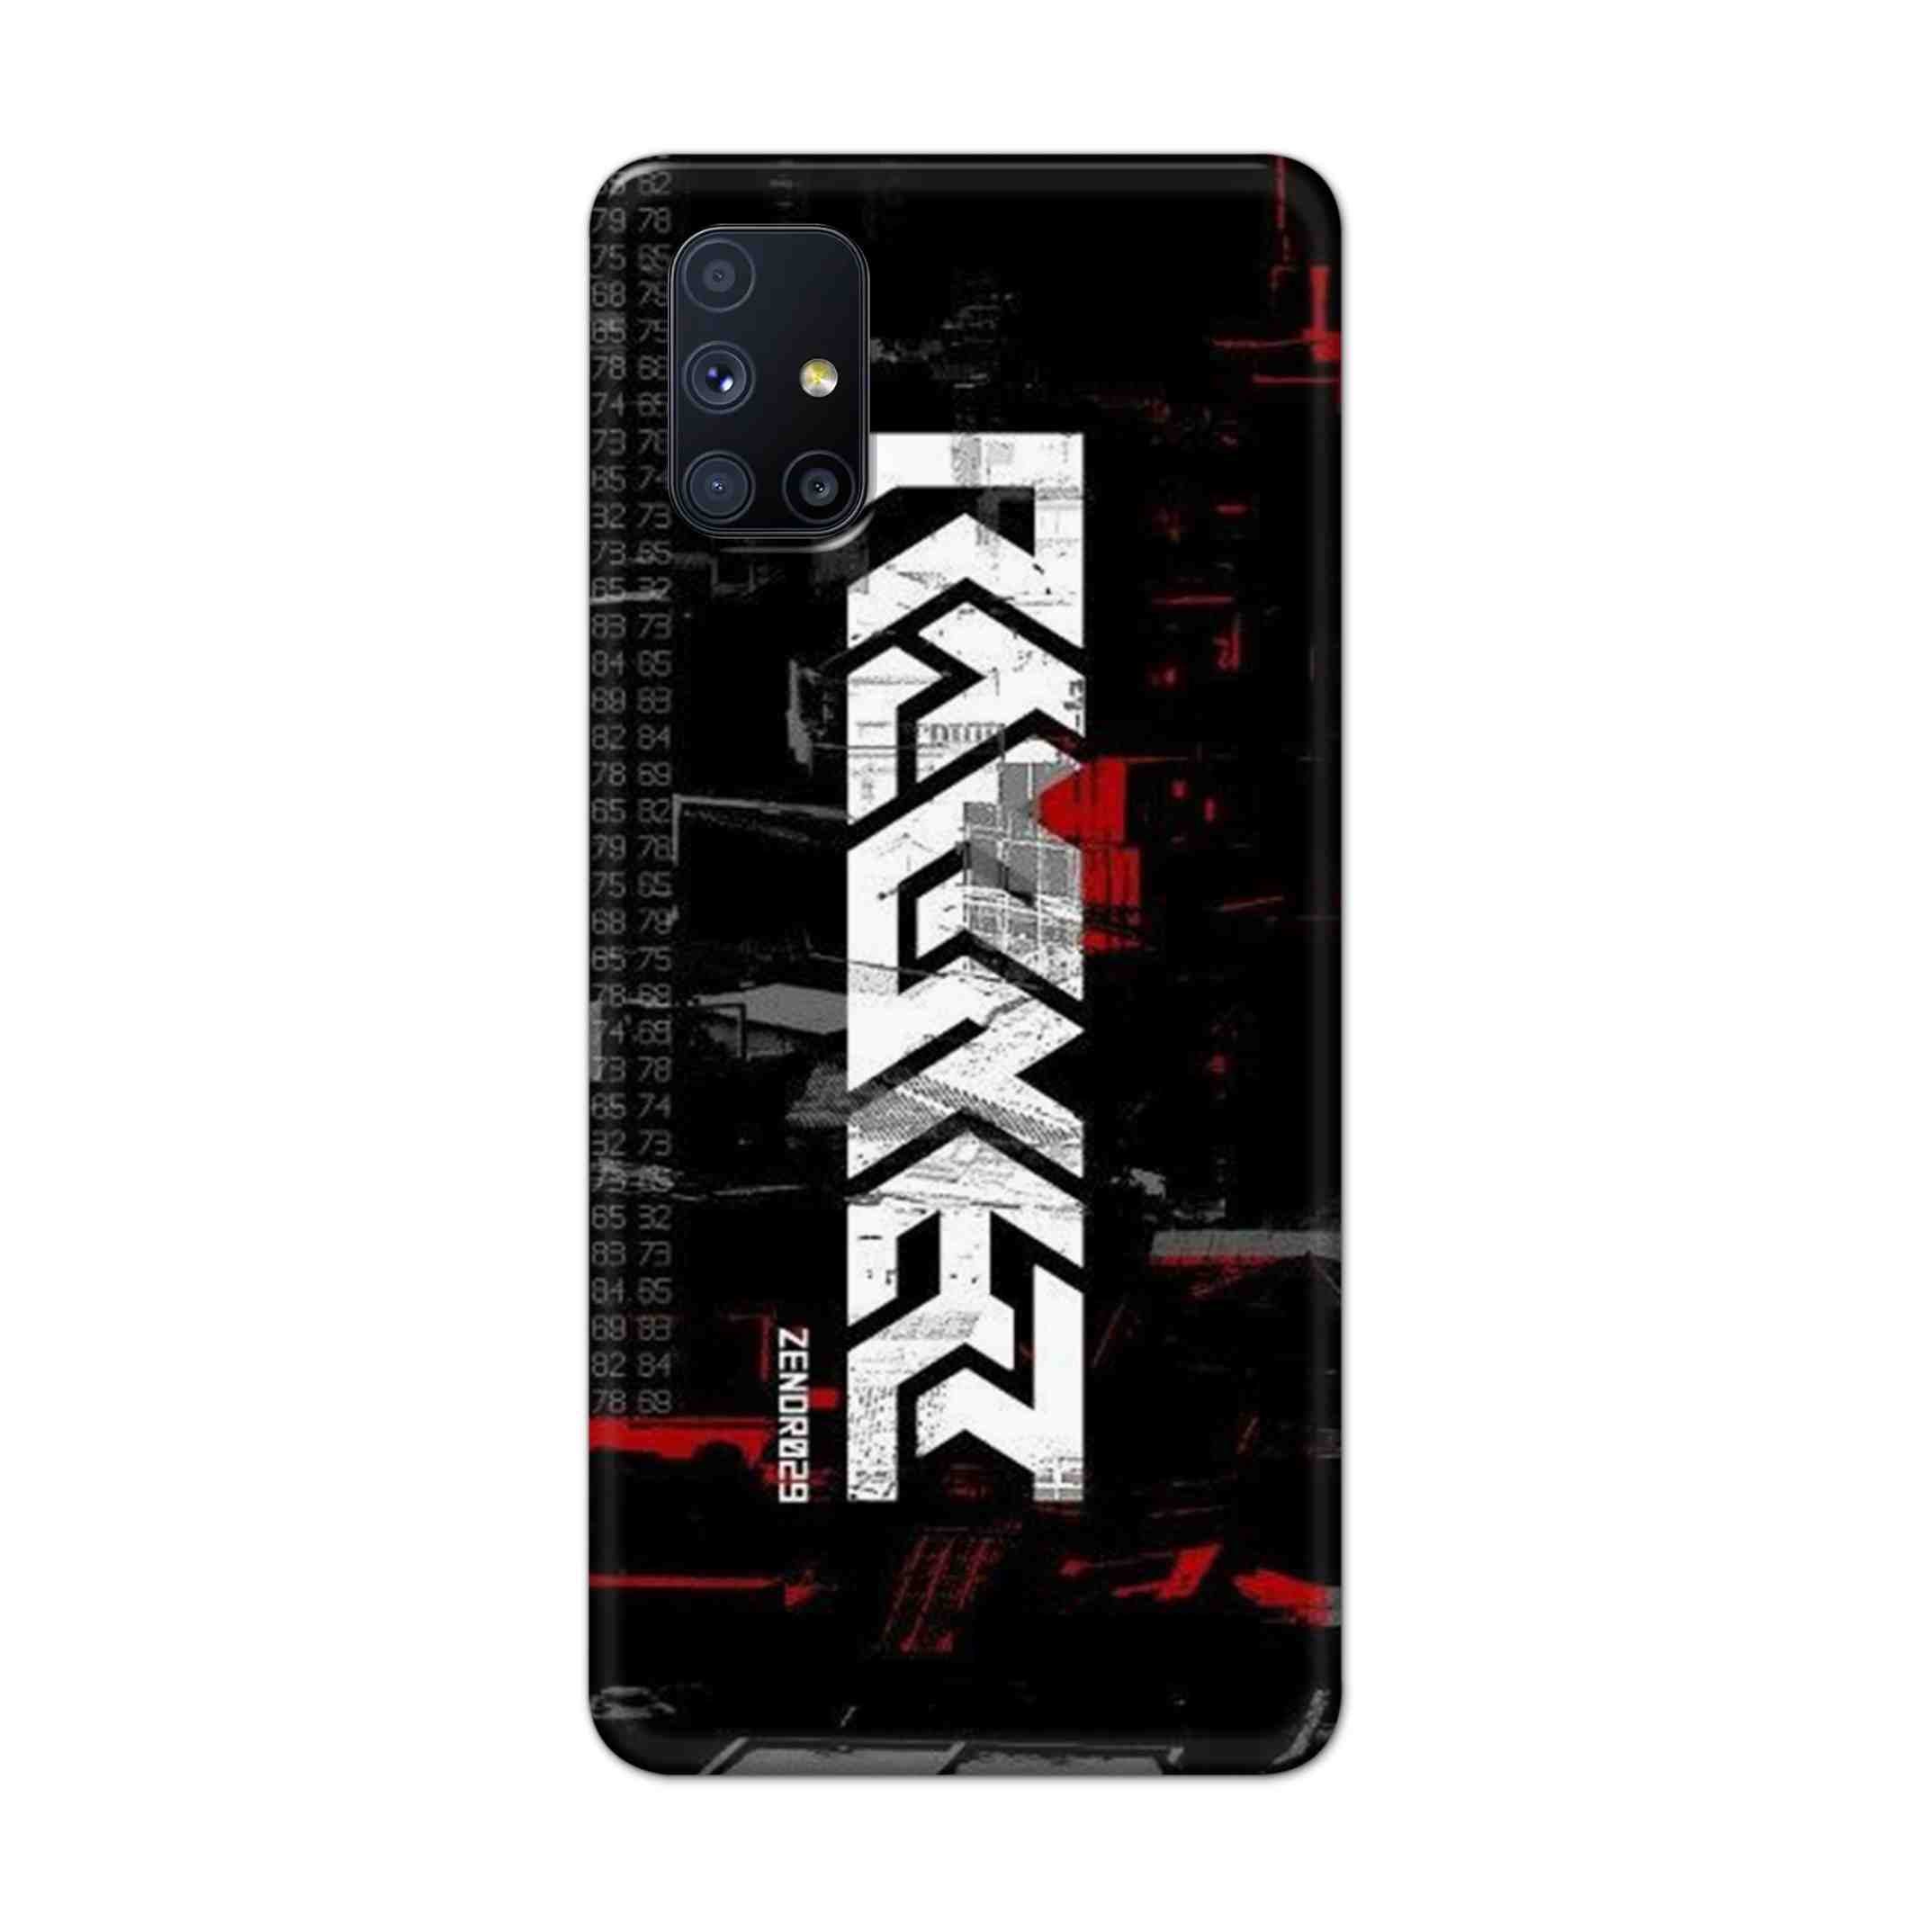 Buy Raxer Hard Back Mobile Phone Case Cover For Samsung Galaxy M51 Online